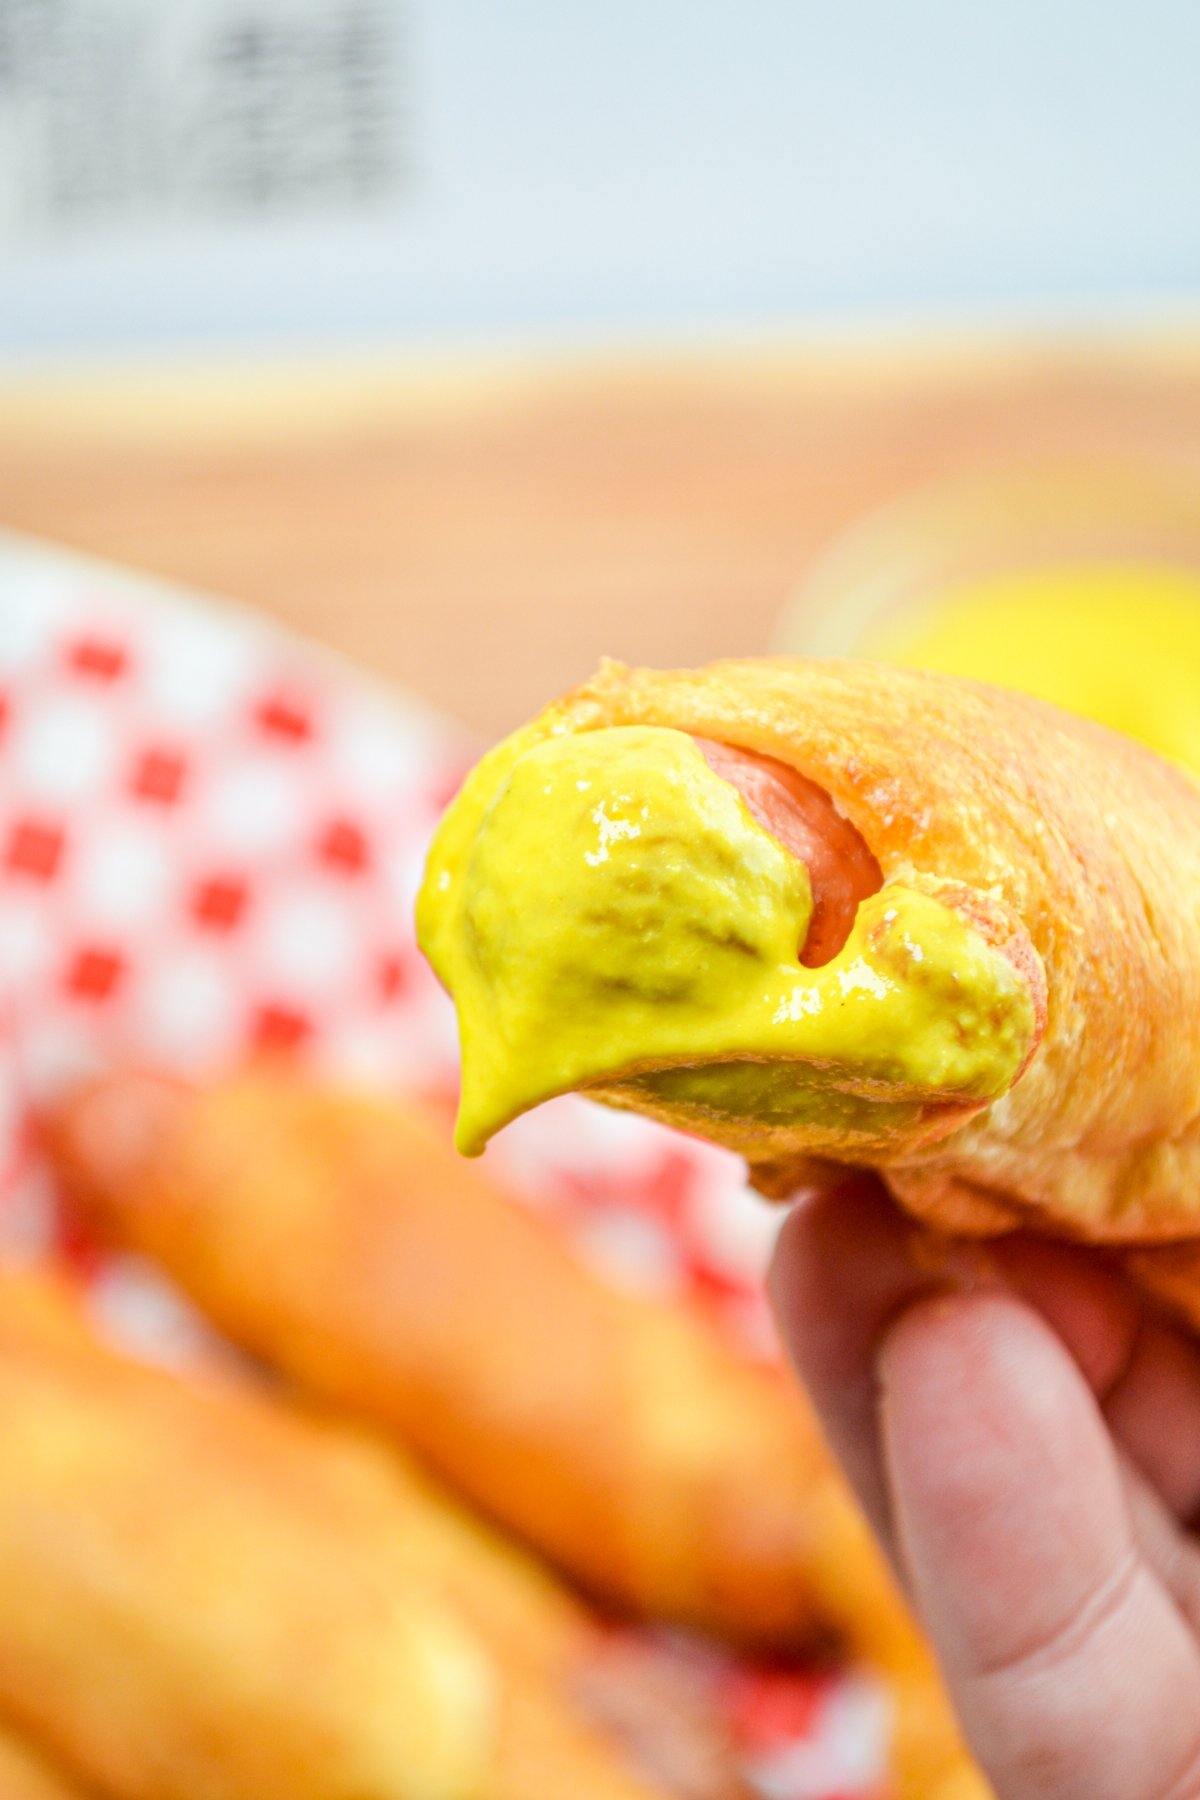 A pig in a blanket, dipped in bright yellow mustard.